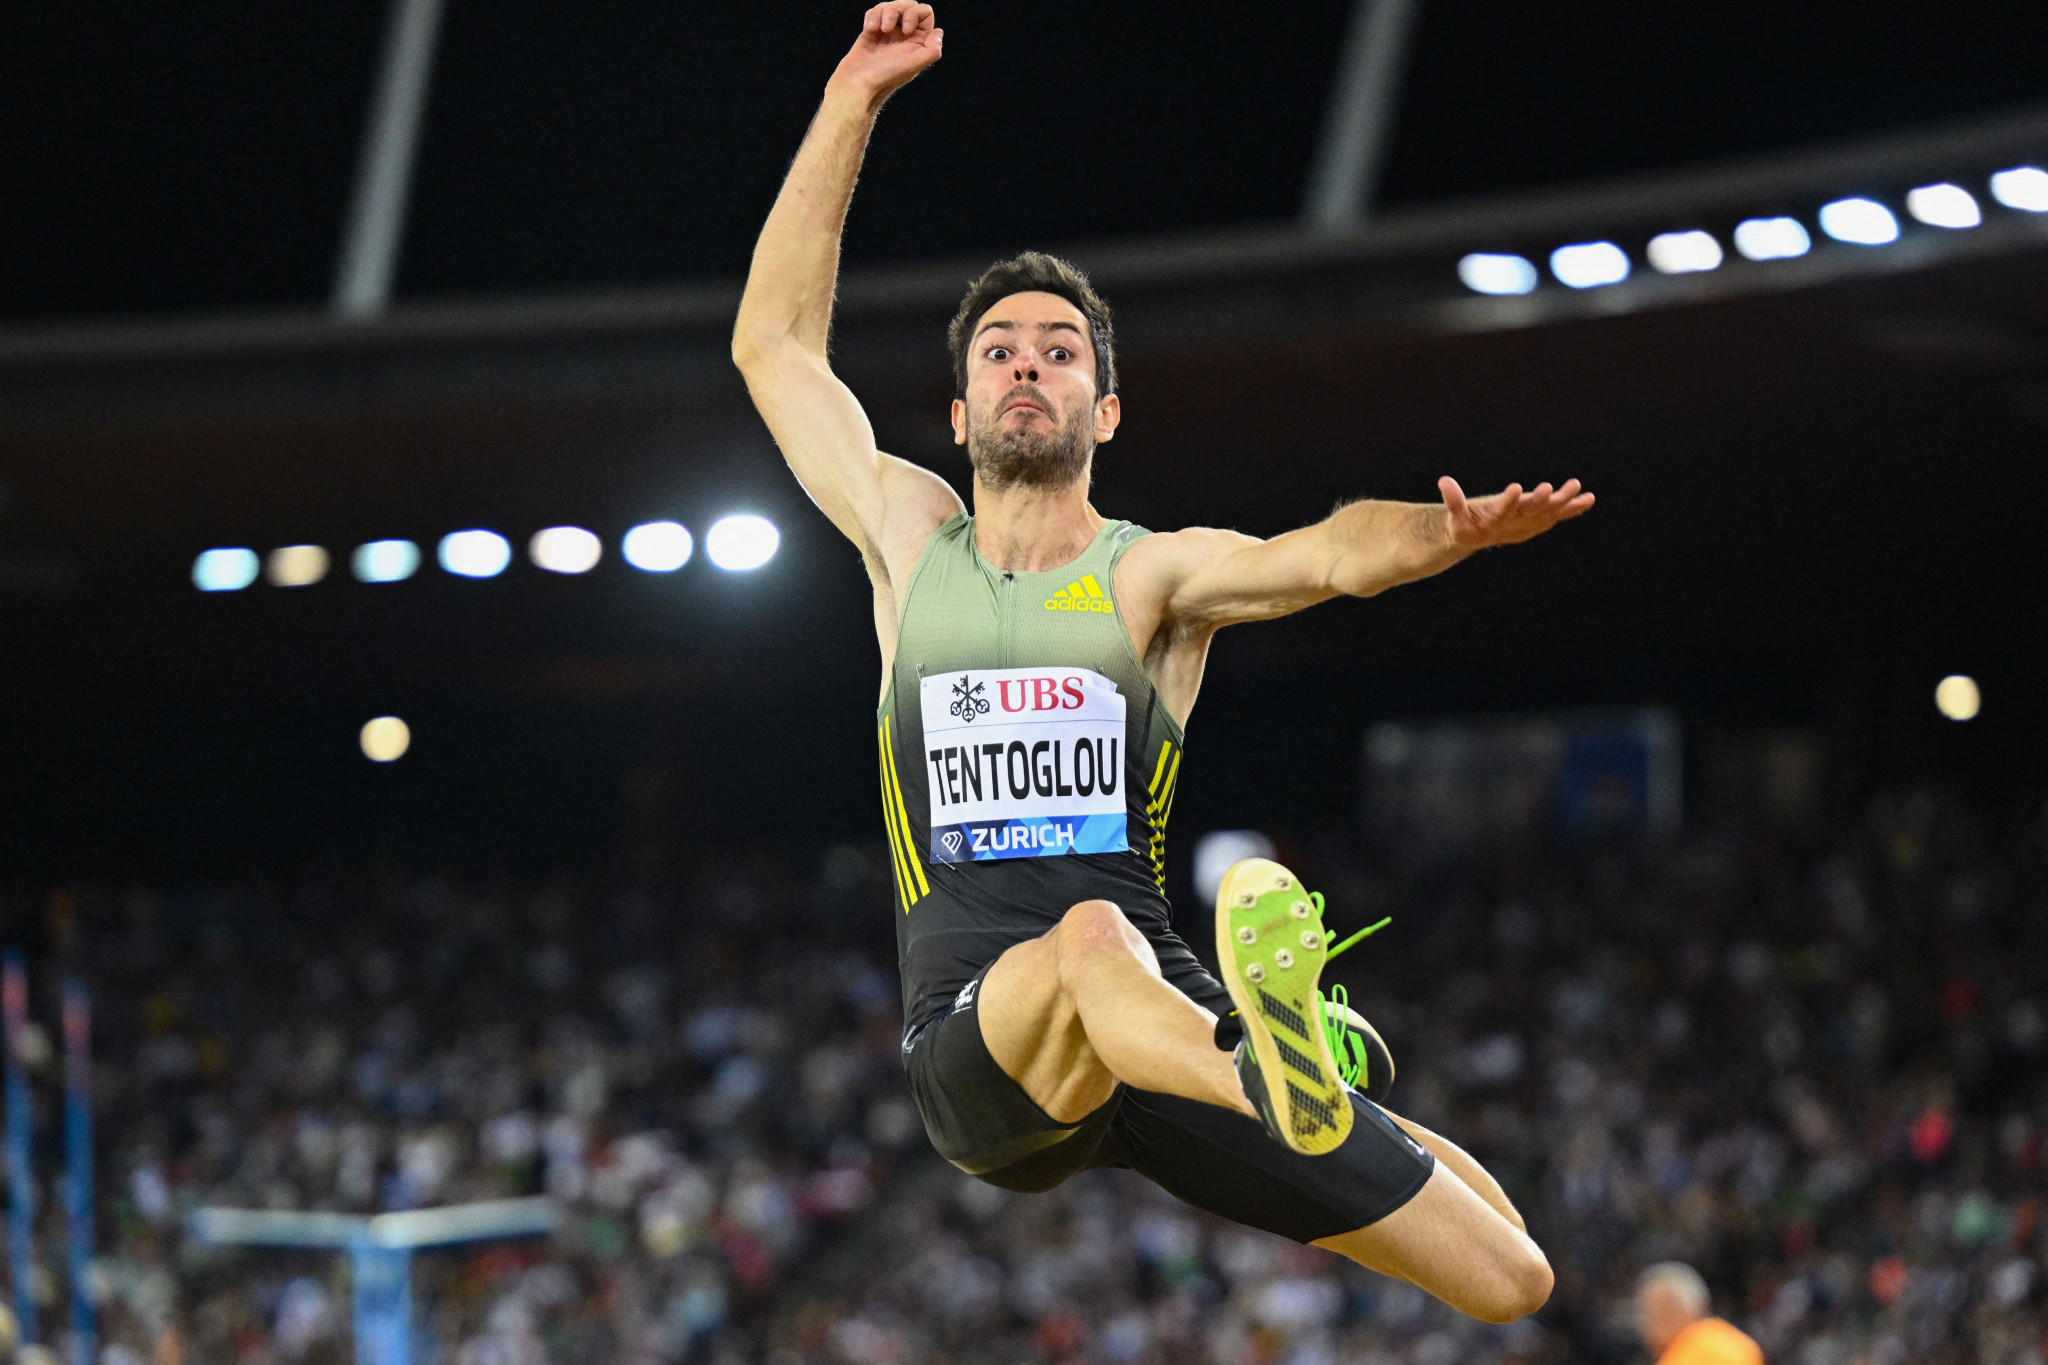 Olympic long jump champion Miltiádis Tentóglou is auctioning a pair of his shoes to help victims of the earthquake in Turkey and Syria ©Getty Images